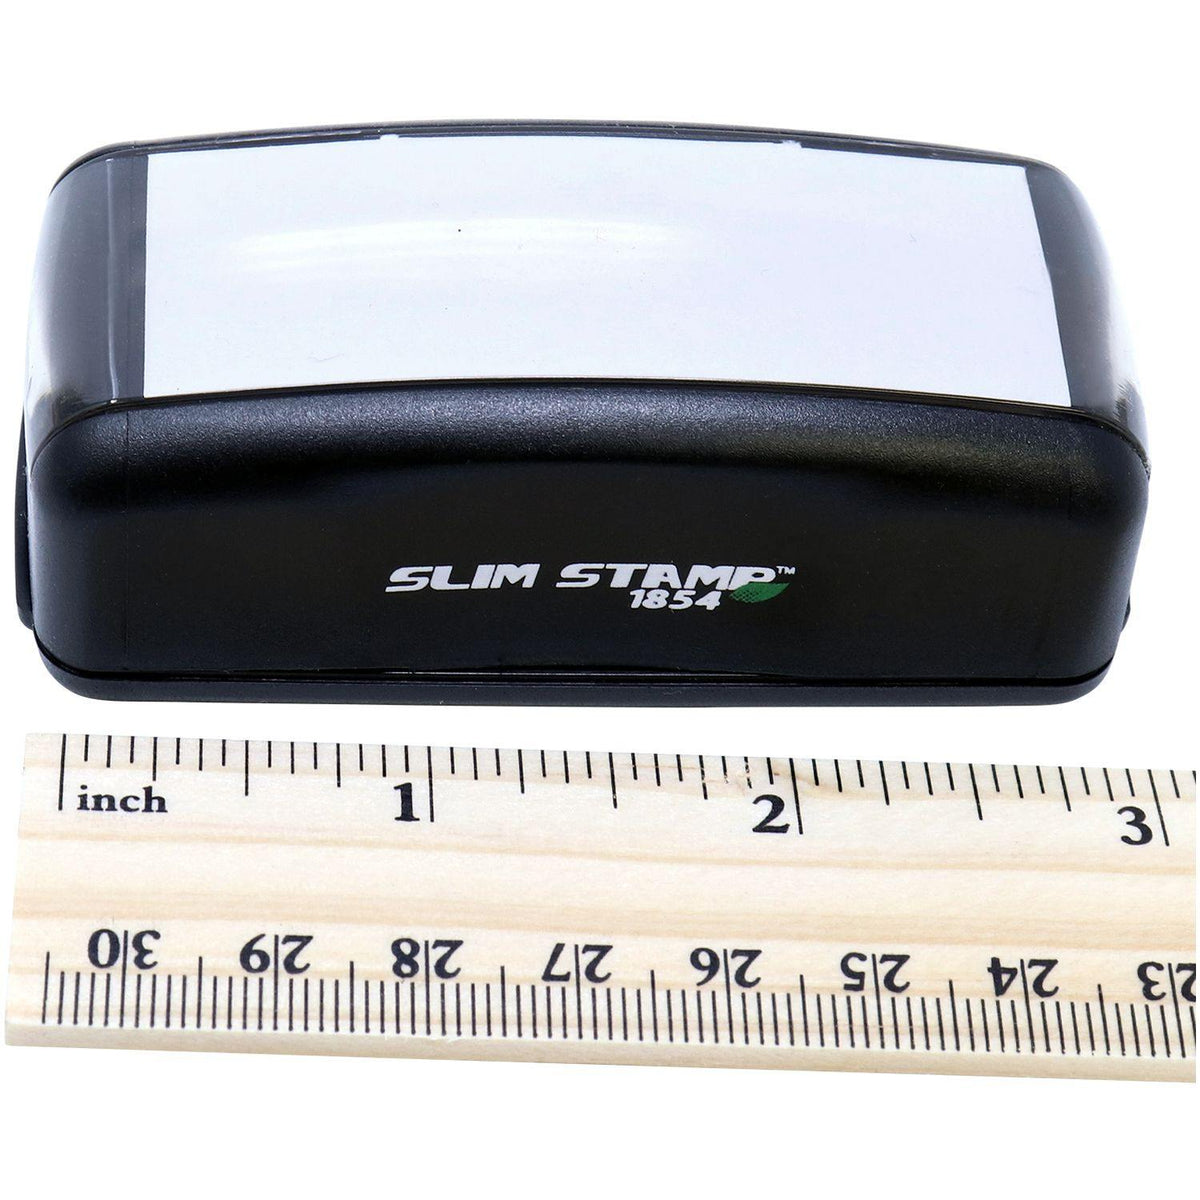 Measurement Large Pre-Inked You Insurance has Paid their portion Stamp with Ruler